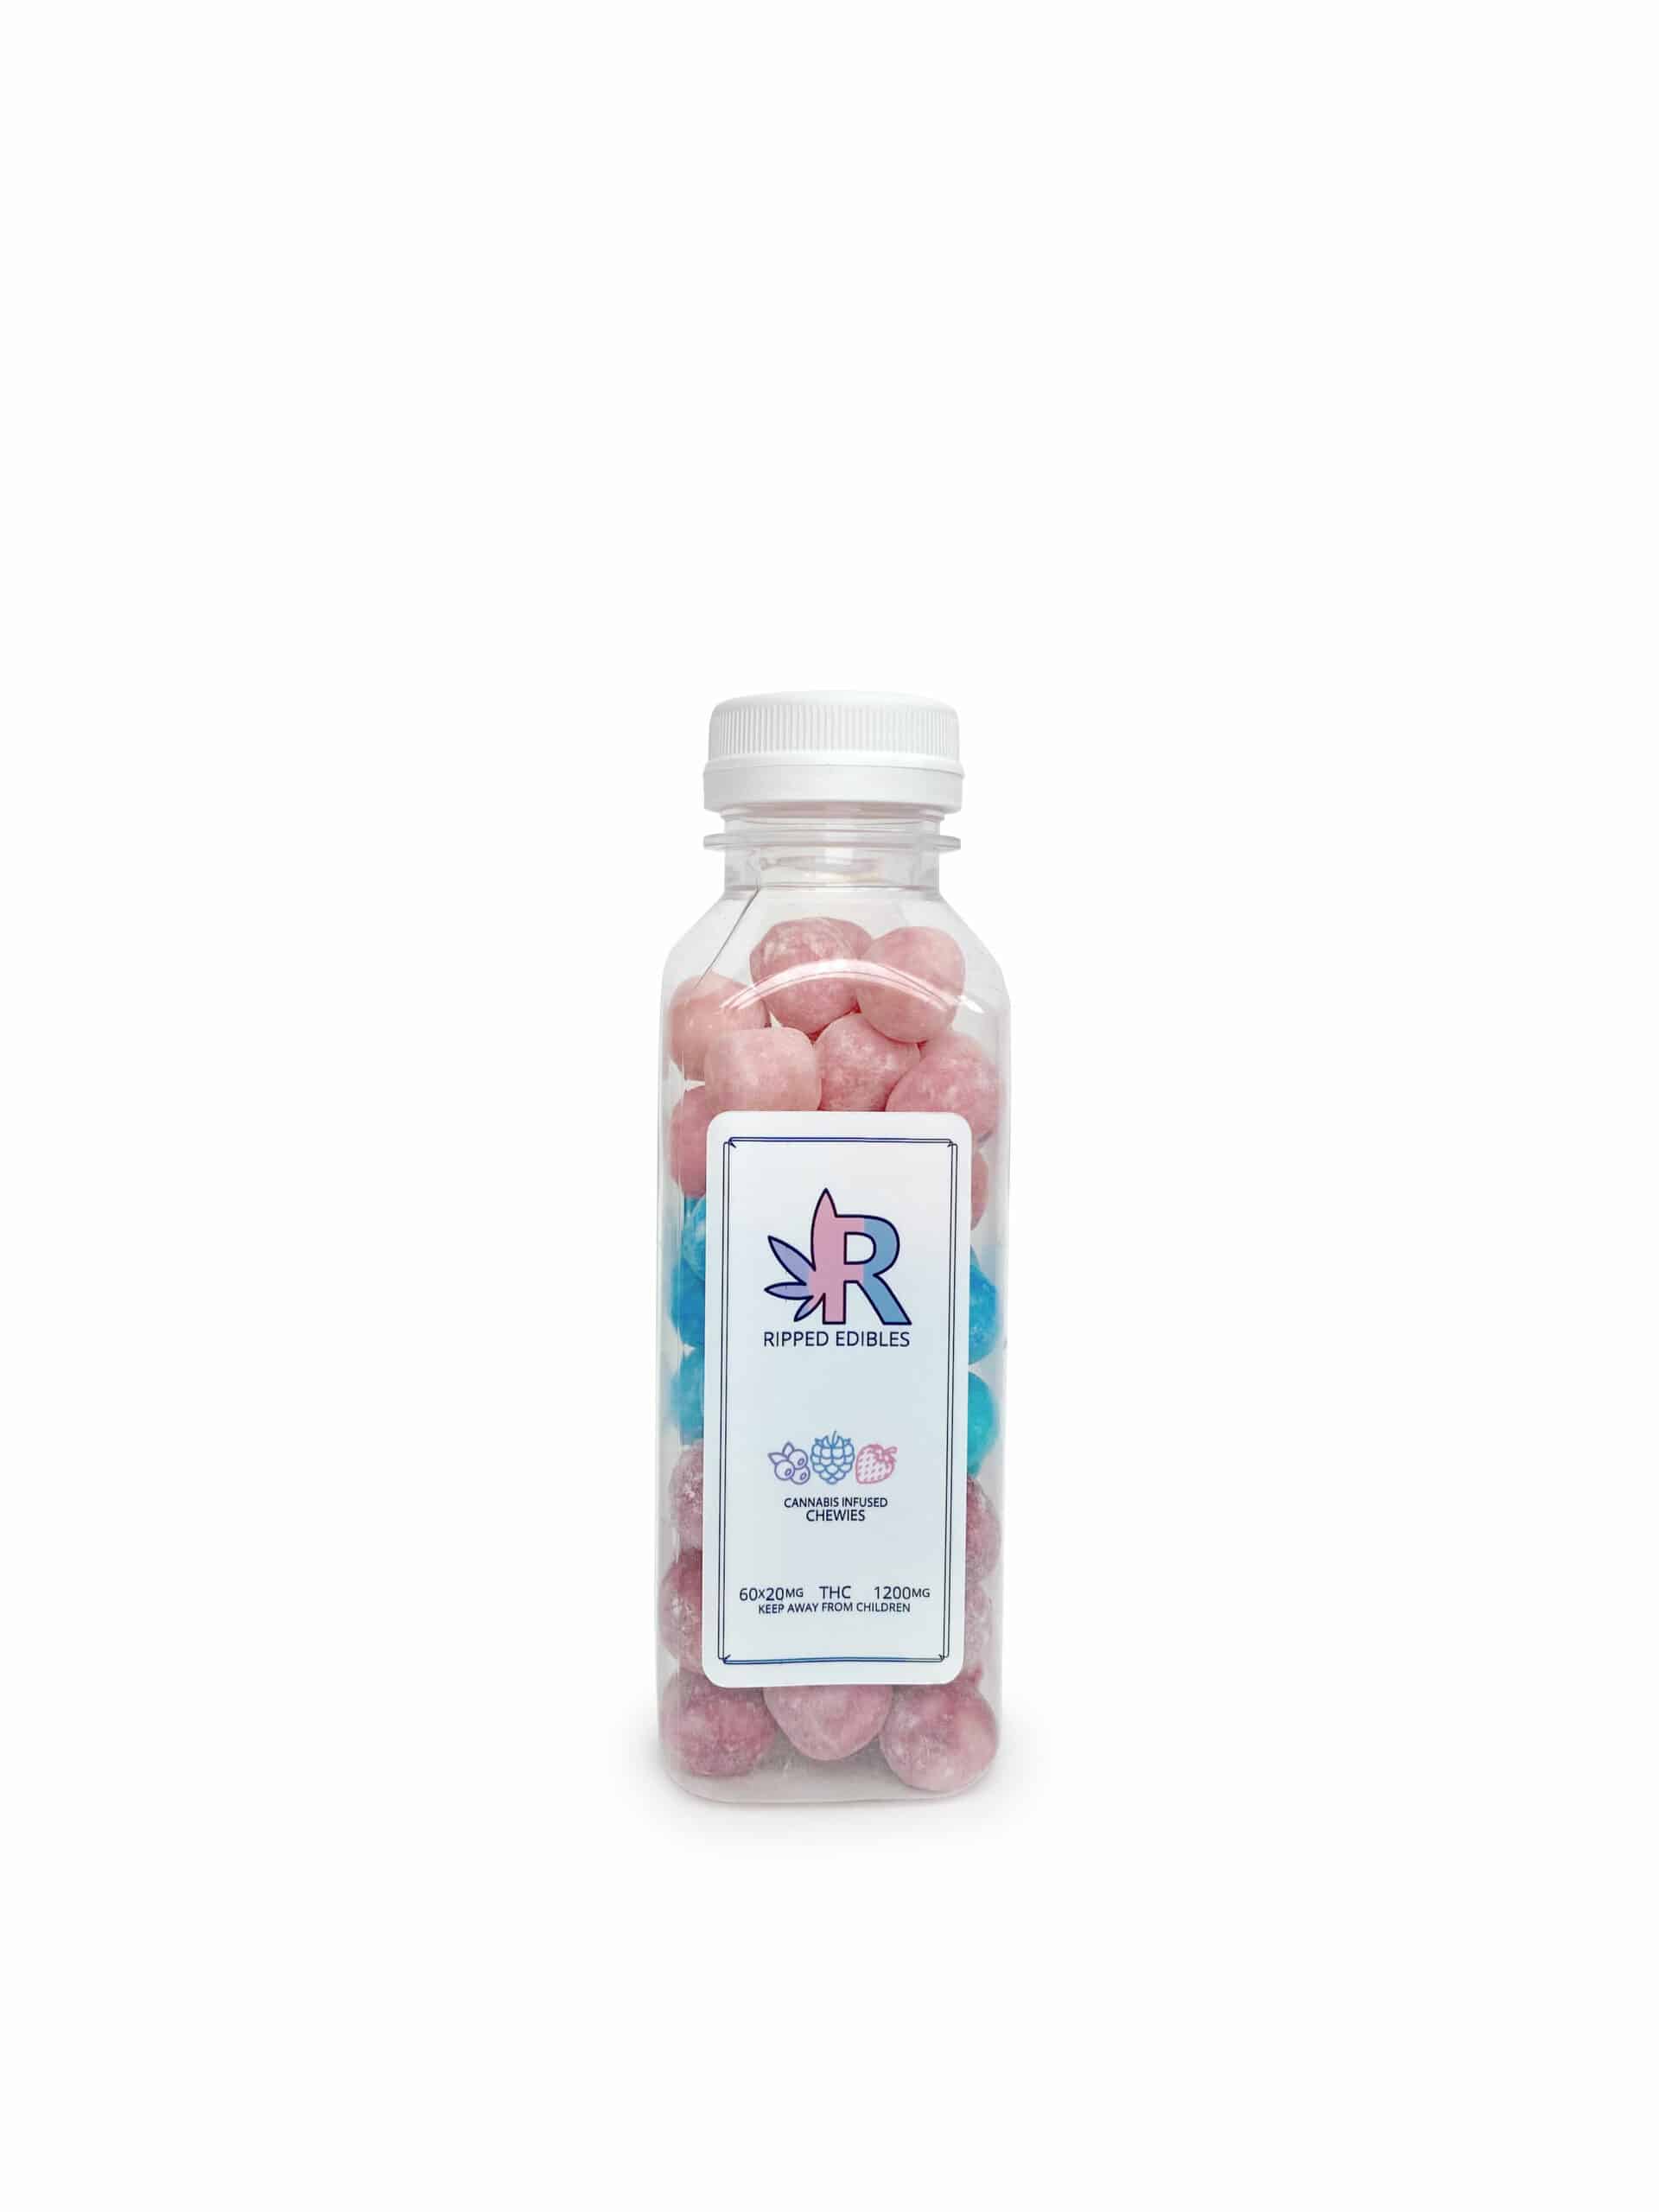 Buy Ripped Edibles – Bulk Chewies 1200mg THC online Canada